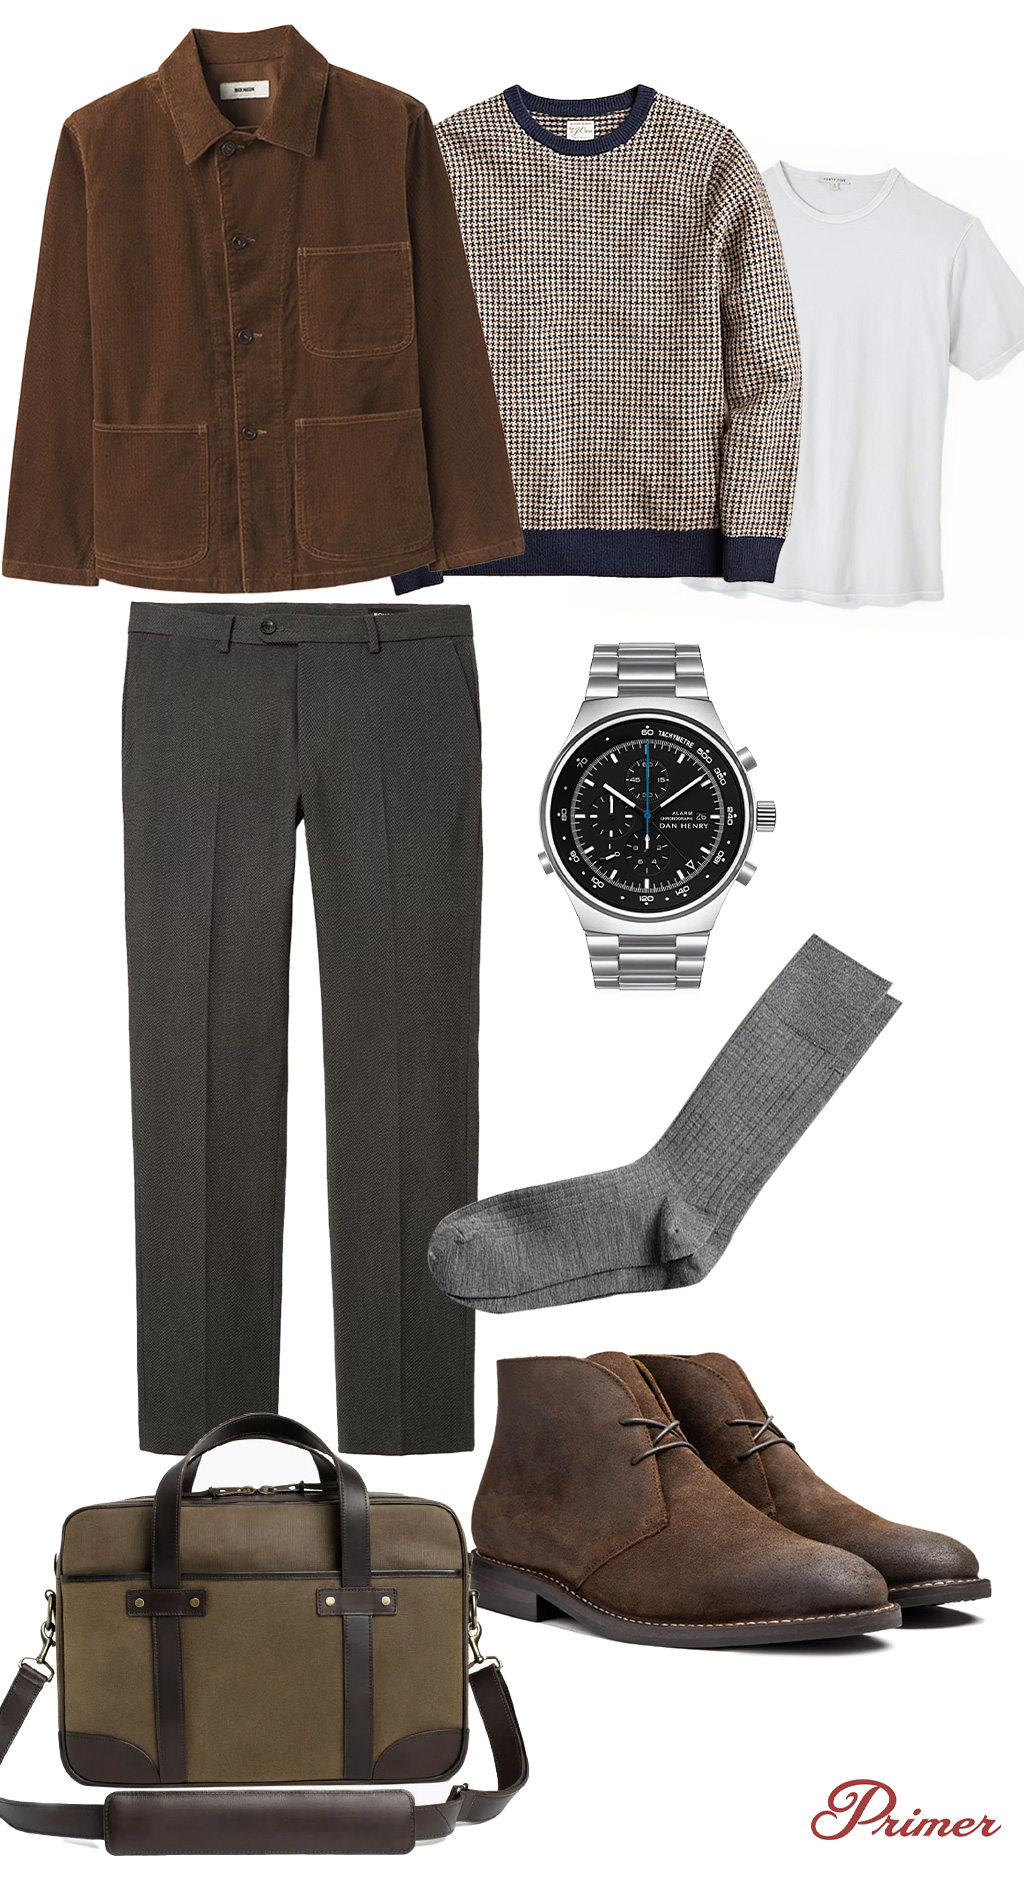 Men's fashion ensemble featuring a brown corduroy jacket, black and white houndstooth sweater, white t-shirt, dark grey trousers, stainless steel wristwatch, grey socks, brown suede ankle boots, and an olive green messenger bag with brown accents. The brand 'Primer' is displayed in the corner.